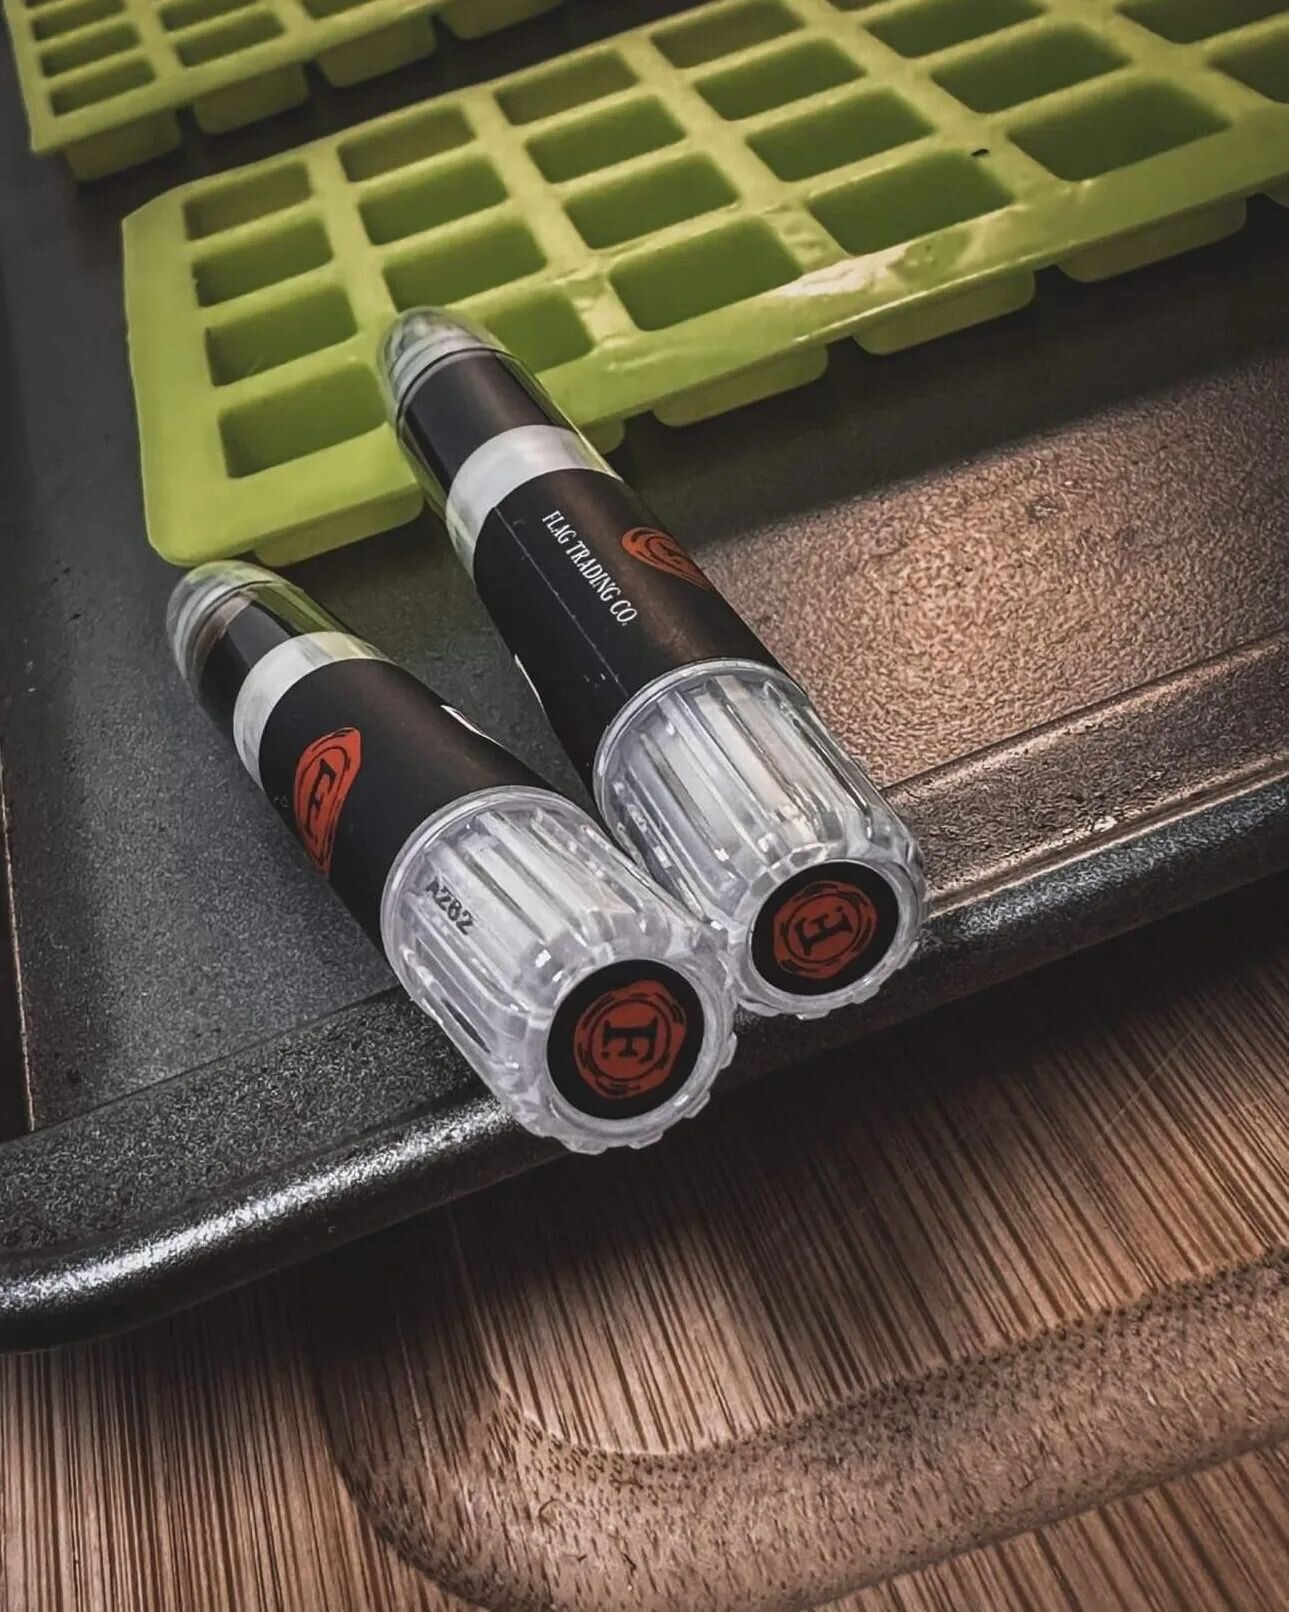 Starting 2023 off with a bang 💀 
Check out how to make some wicked DIY edibles with our Black Oil. 

See the full reel in our stories or on @reeferbuddy_ 🤘